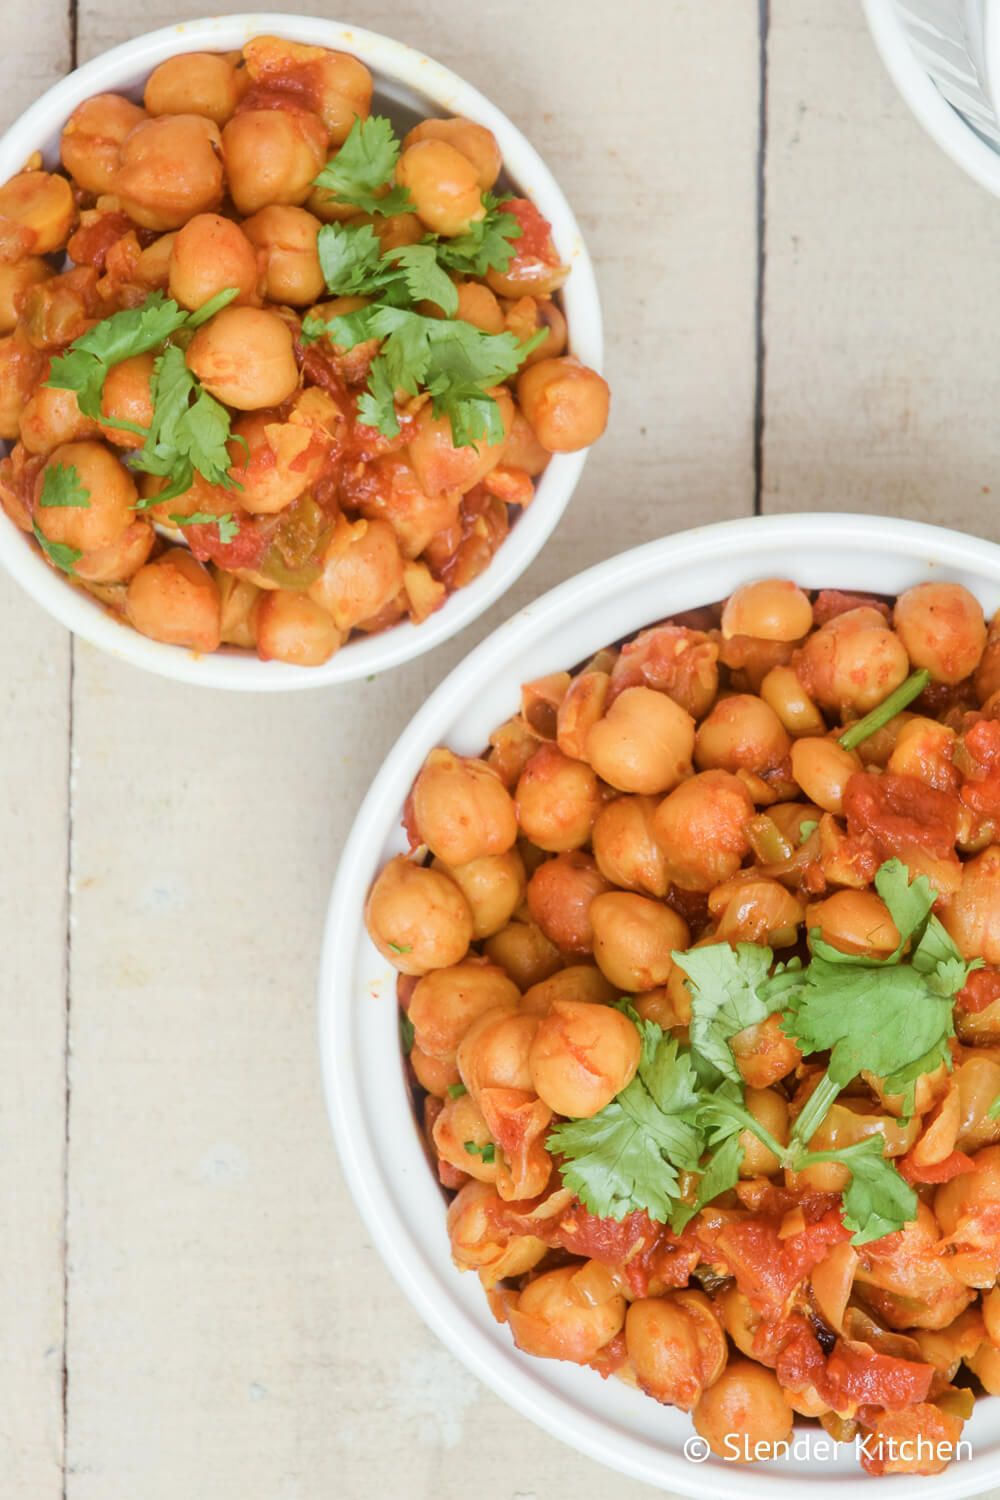 Chana masala with chickpeas cooked in curry tomato sauce in two white bowls.